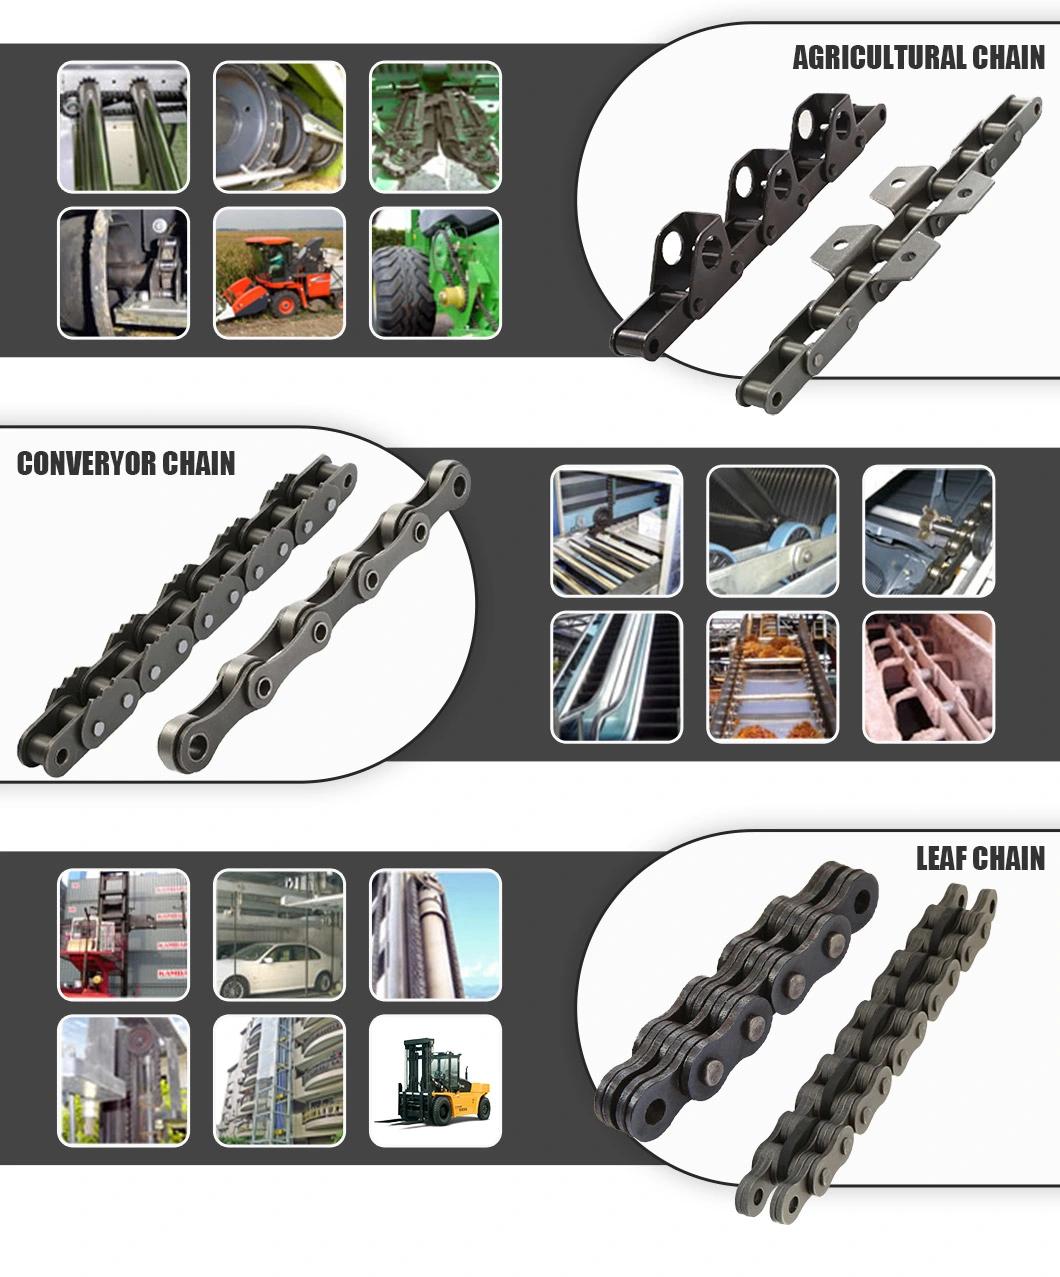 High Precision Conveyor Agricultural Chain with Attachment